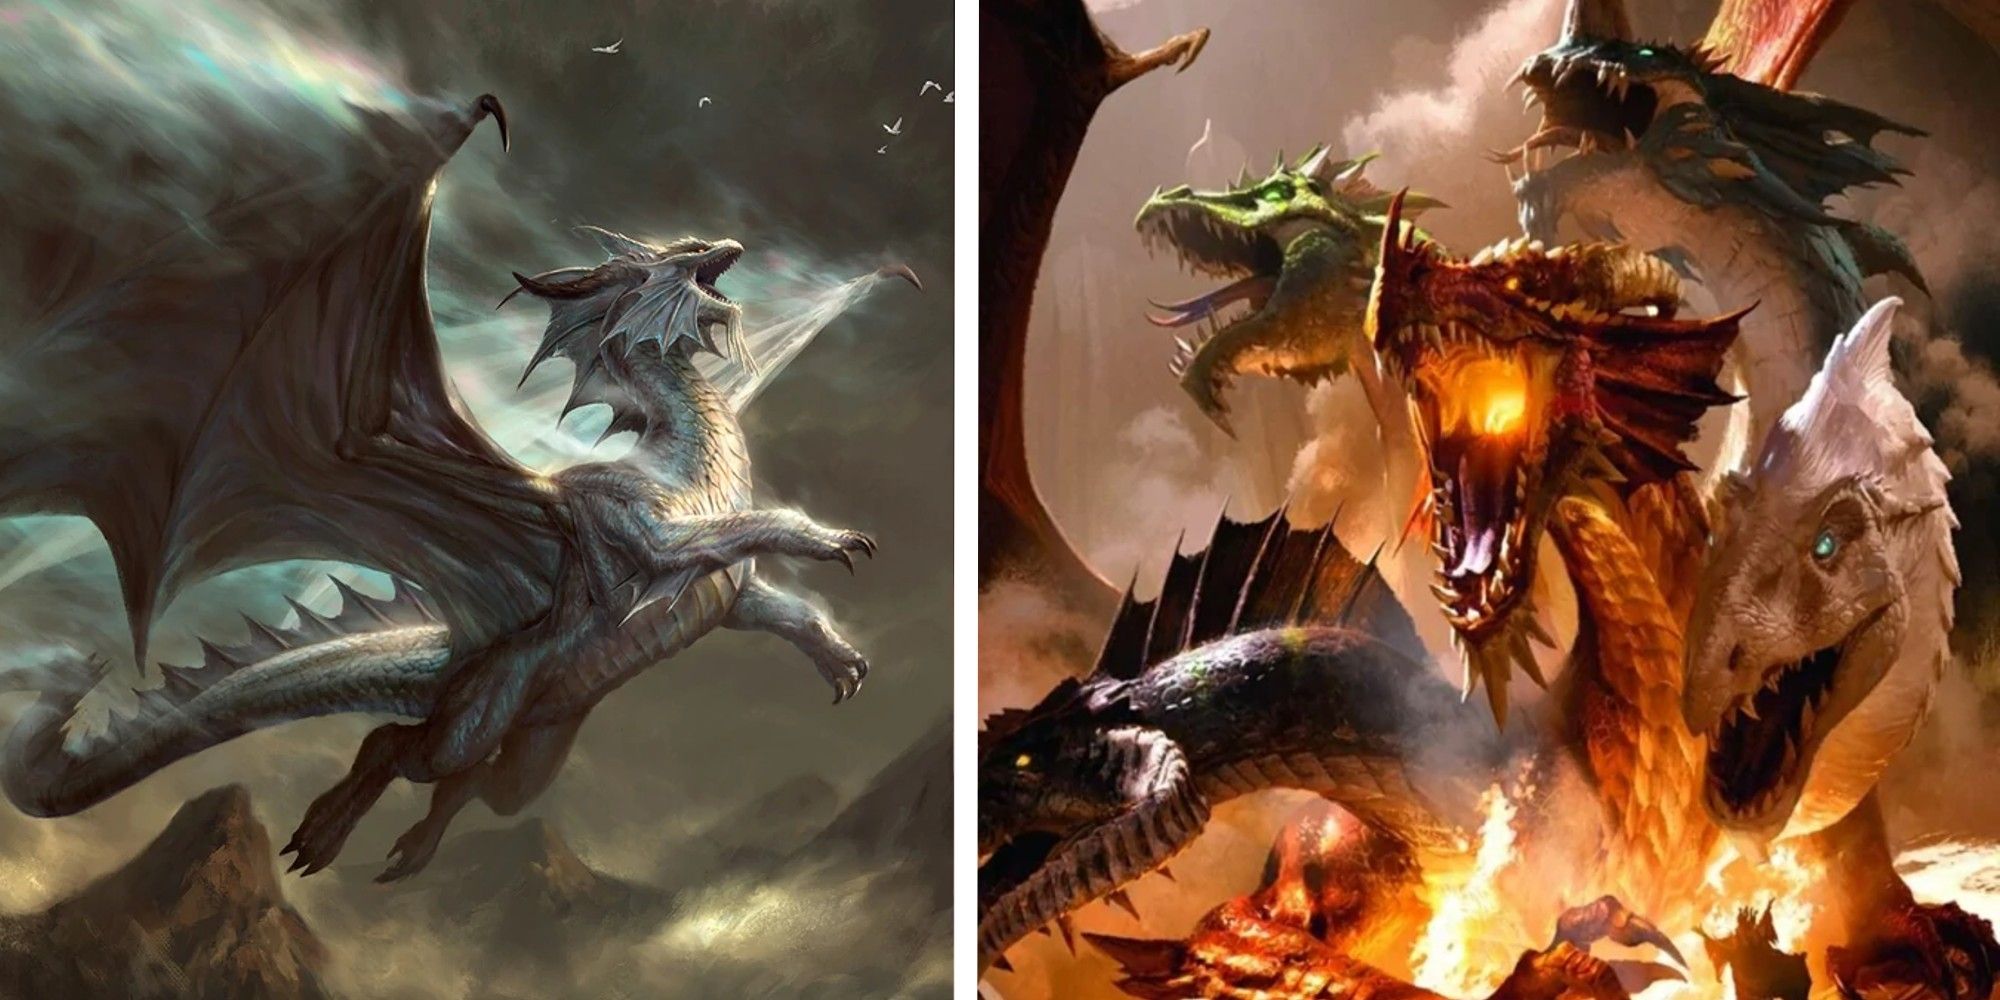 A collage of the iconic dragon gods from Dungeons & Dragons.